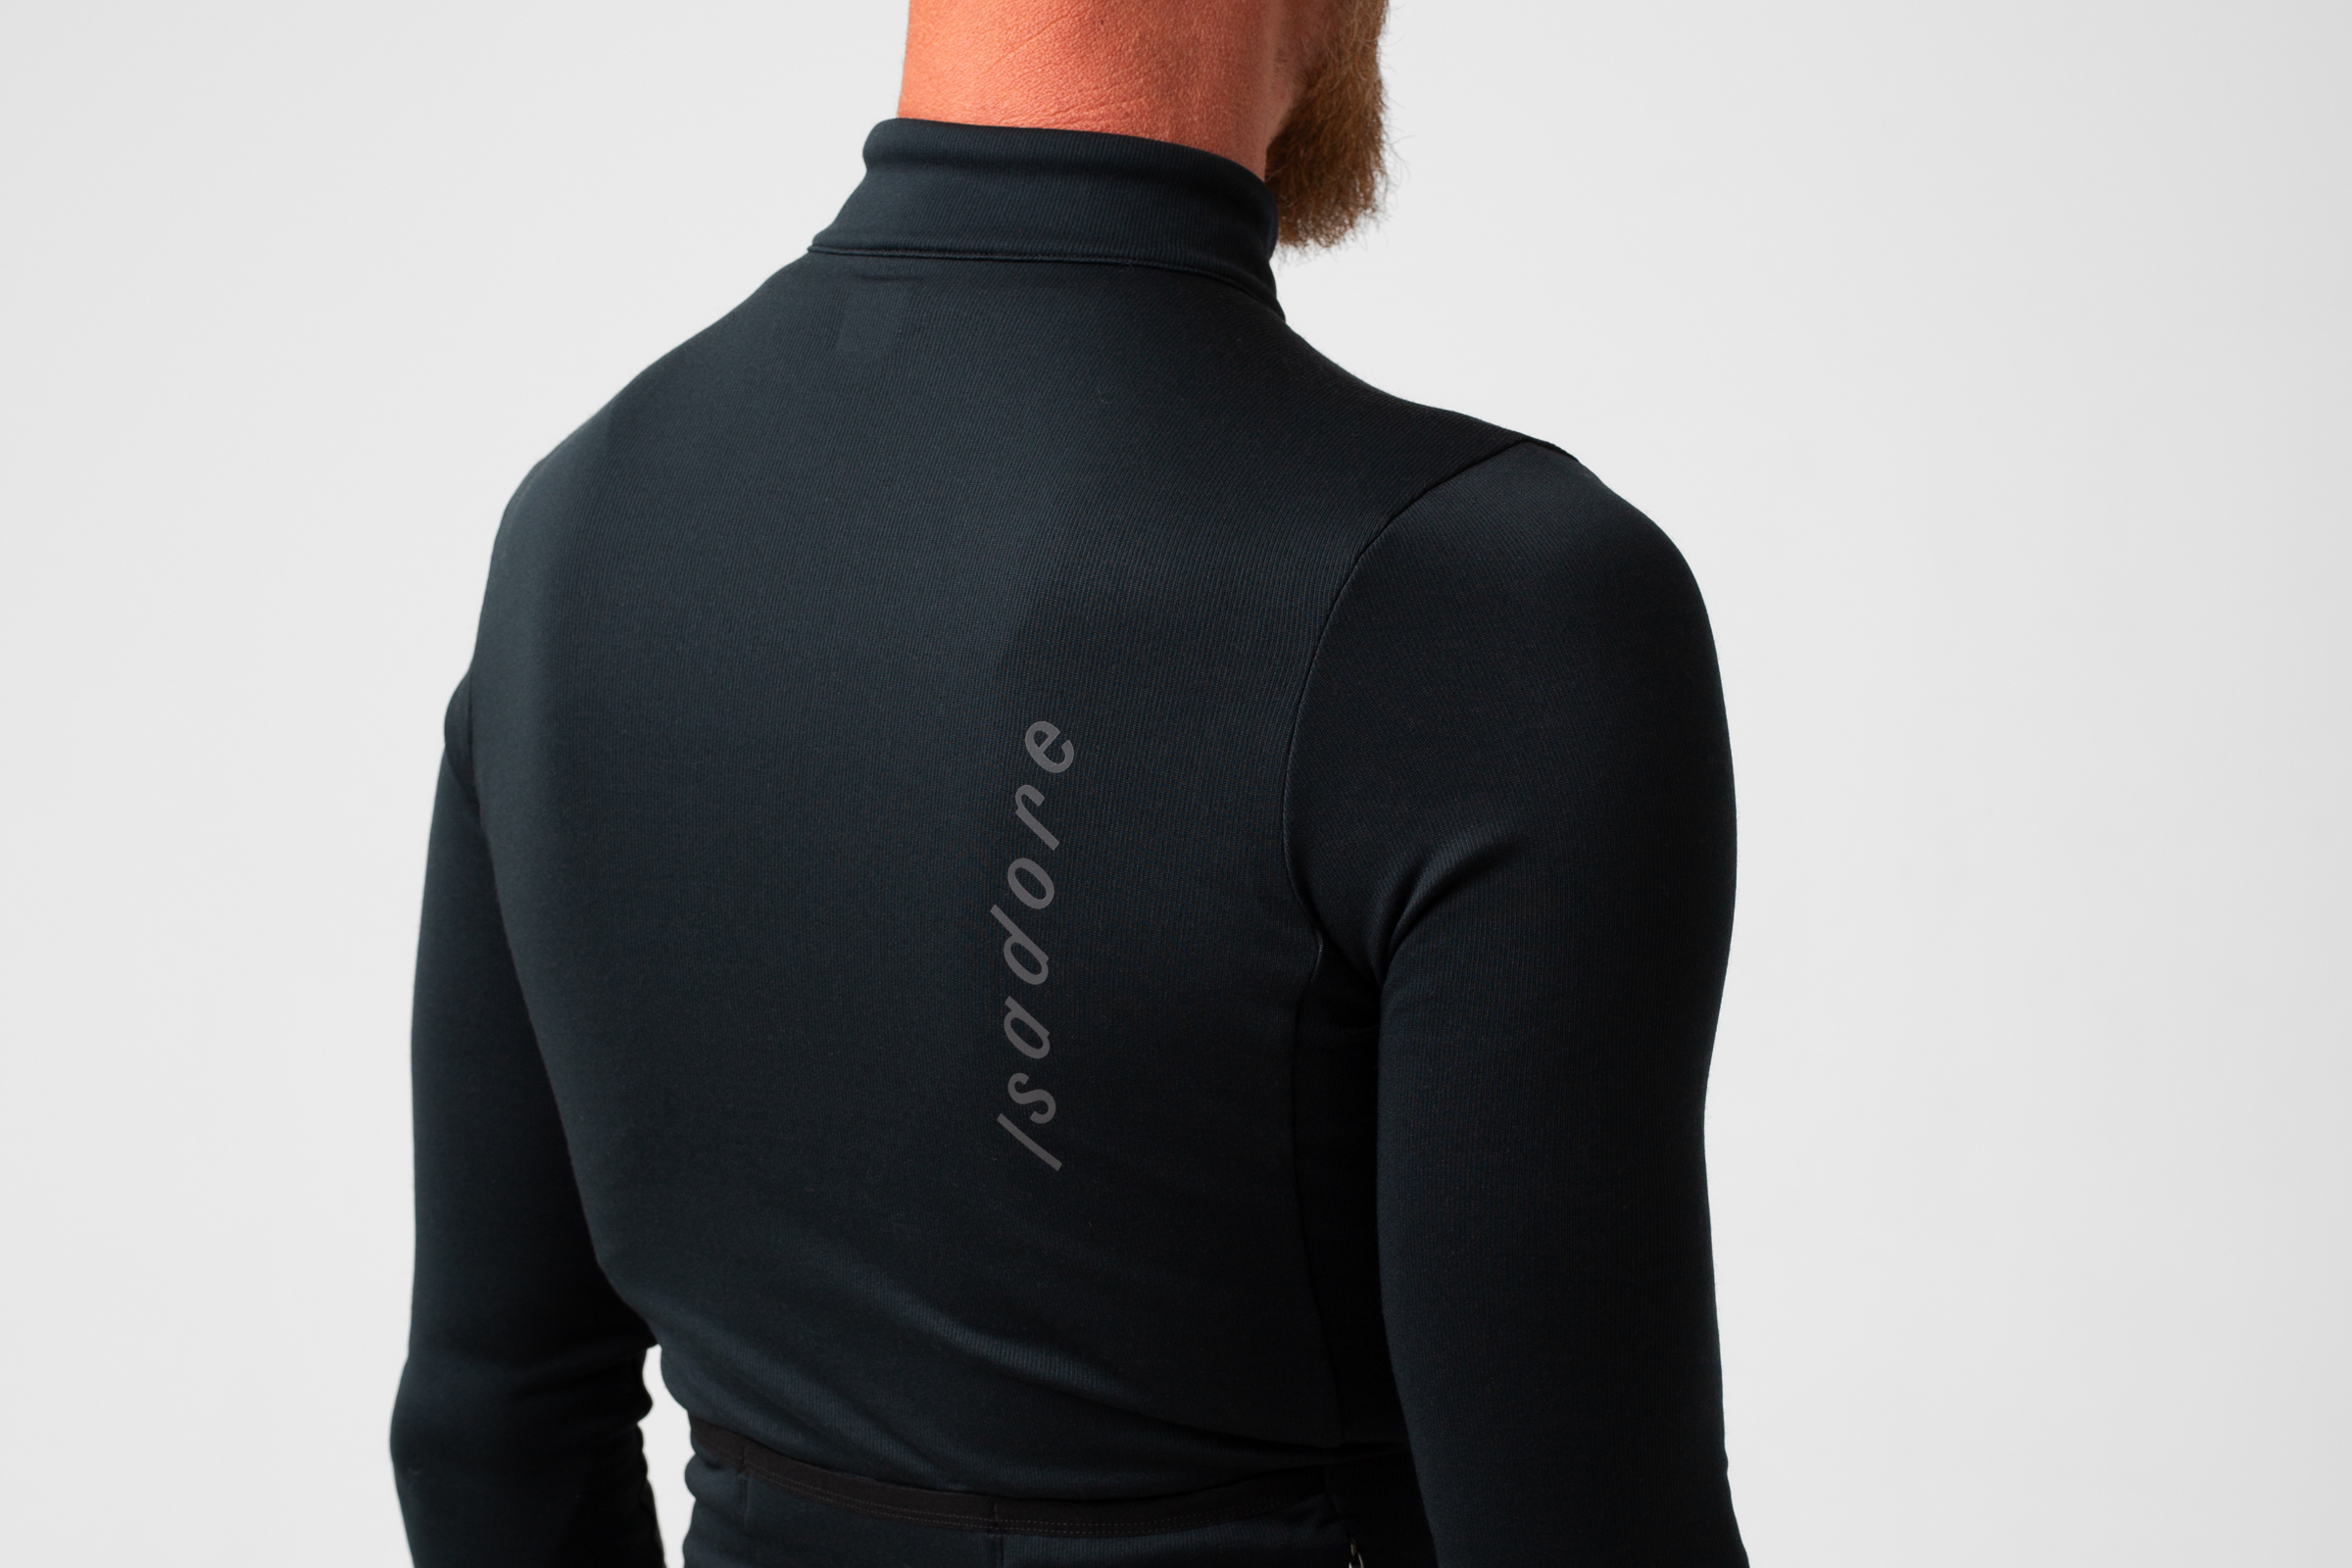 Signature Thermal Long Sleeve Jersey Anthracite